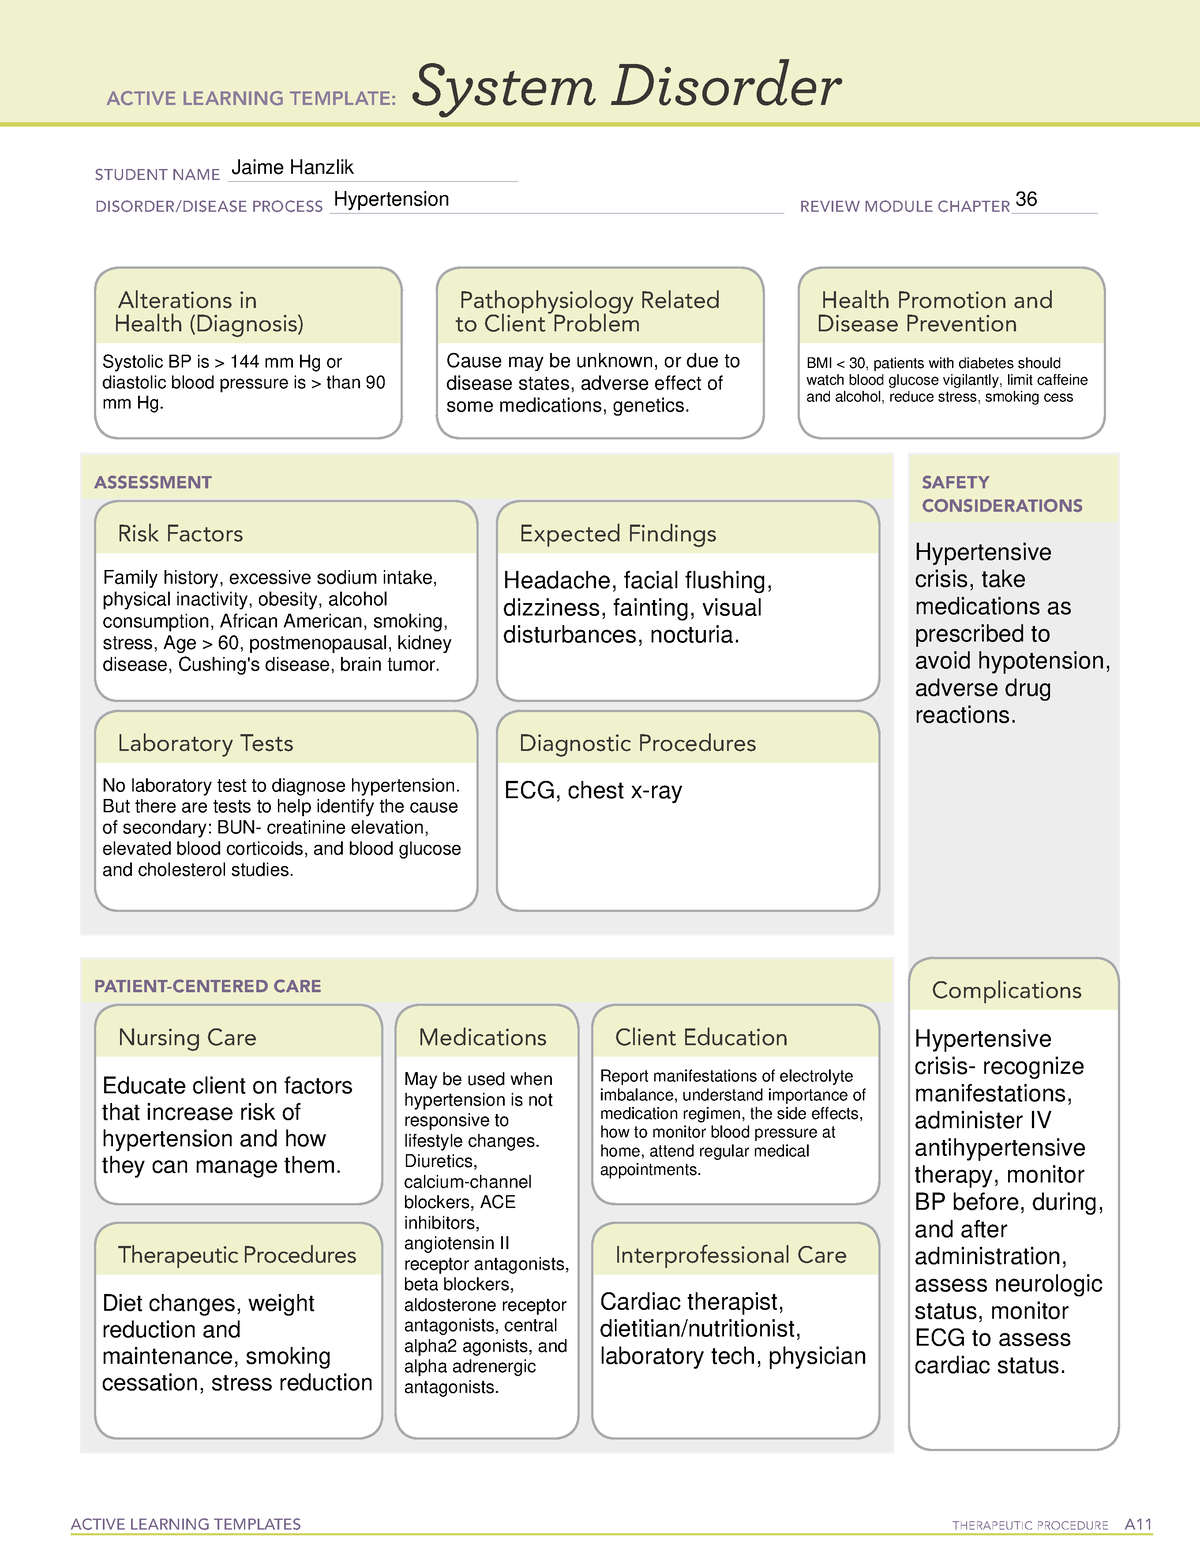 ATI System Disorder Hypertension ACTIVE LEARNING TEMPLATES